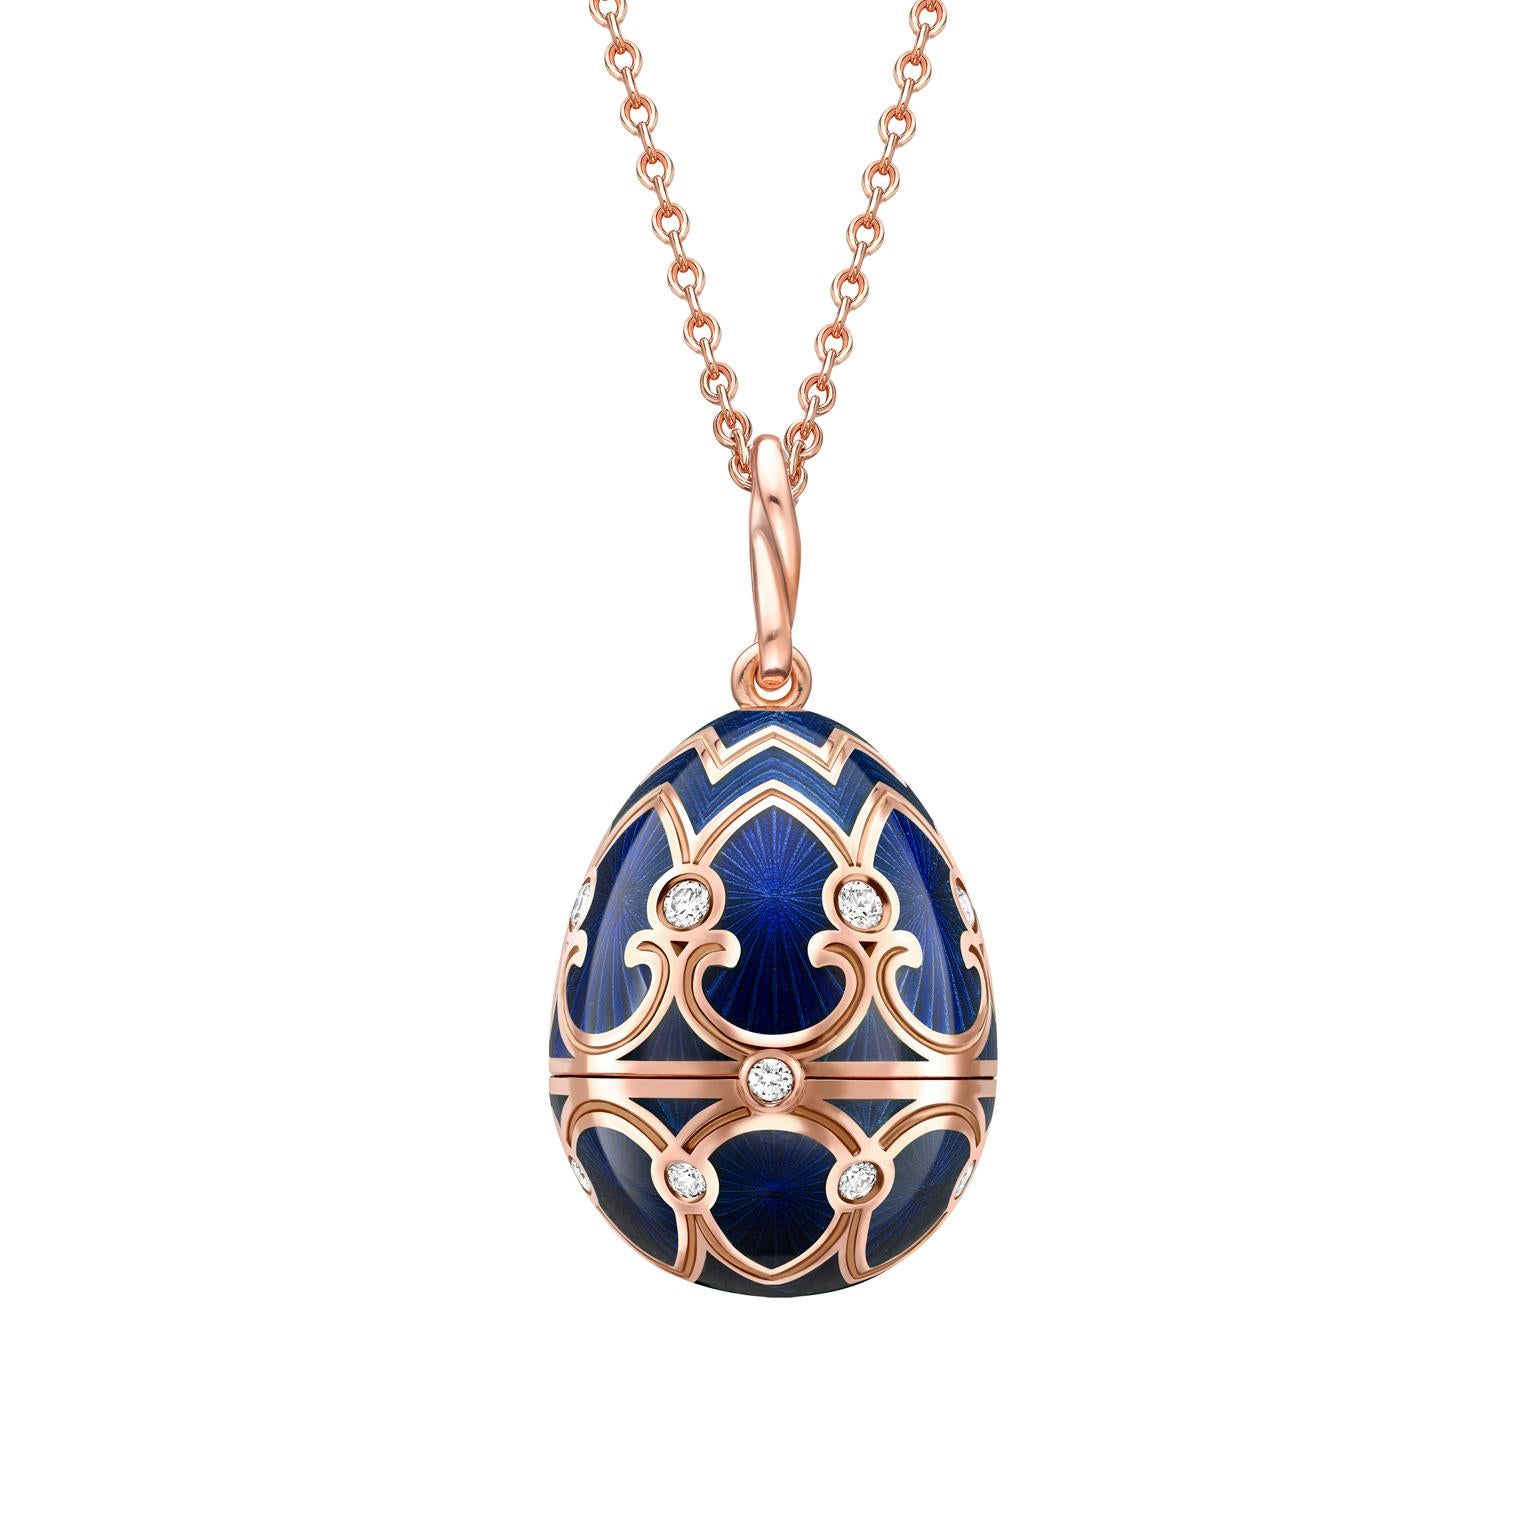 Paying homage to the story of an exquisite onyx polar bear produced by Fabergé in 1909, the Heritage Rose Gold Dark Blue Guilloché Enamel Polar Bear Surprise Locket is crafted from 18k rose gold with dark blue guilloché enamel and set with 15